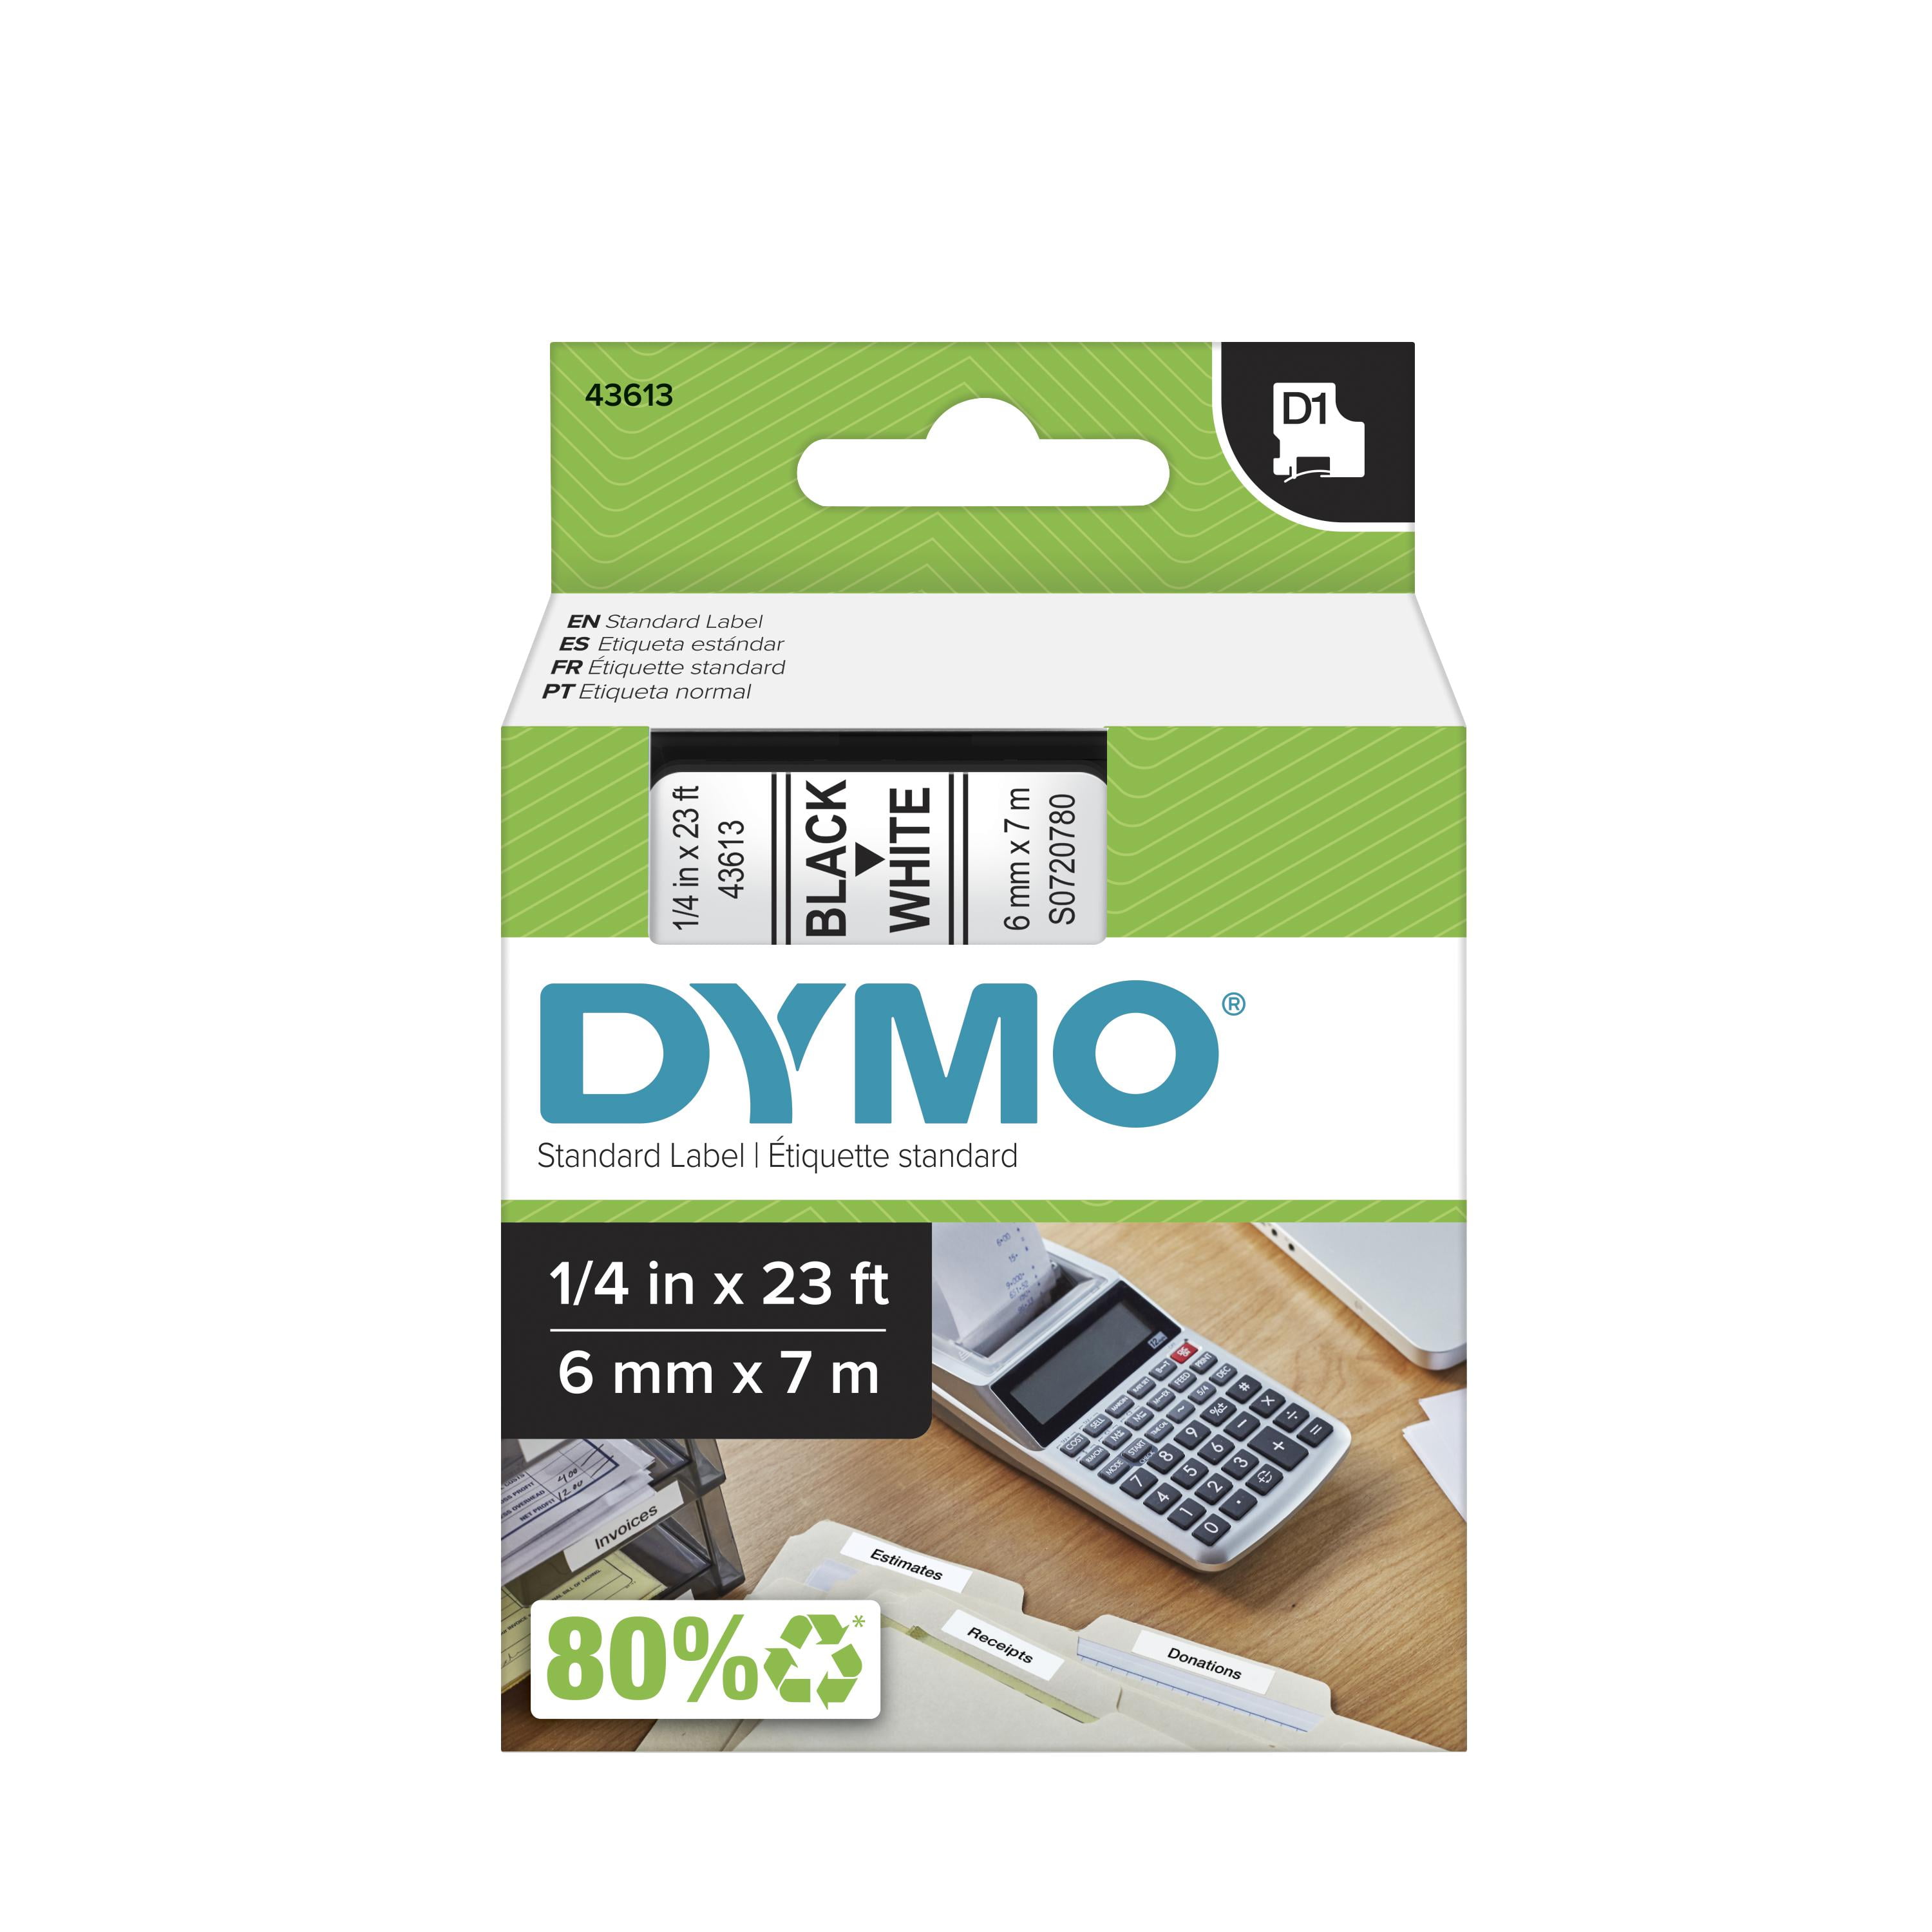 DYMO D1 Standard Polyester self-adhesive black on white Roll (1/4  in x 23 ft) roll(s) label tape for LabelMANAGER 210, 220, 260, 280,  360, 420, 500, PnP, PnP; DYMO LabelWriter 450